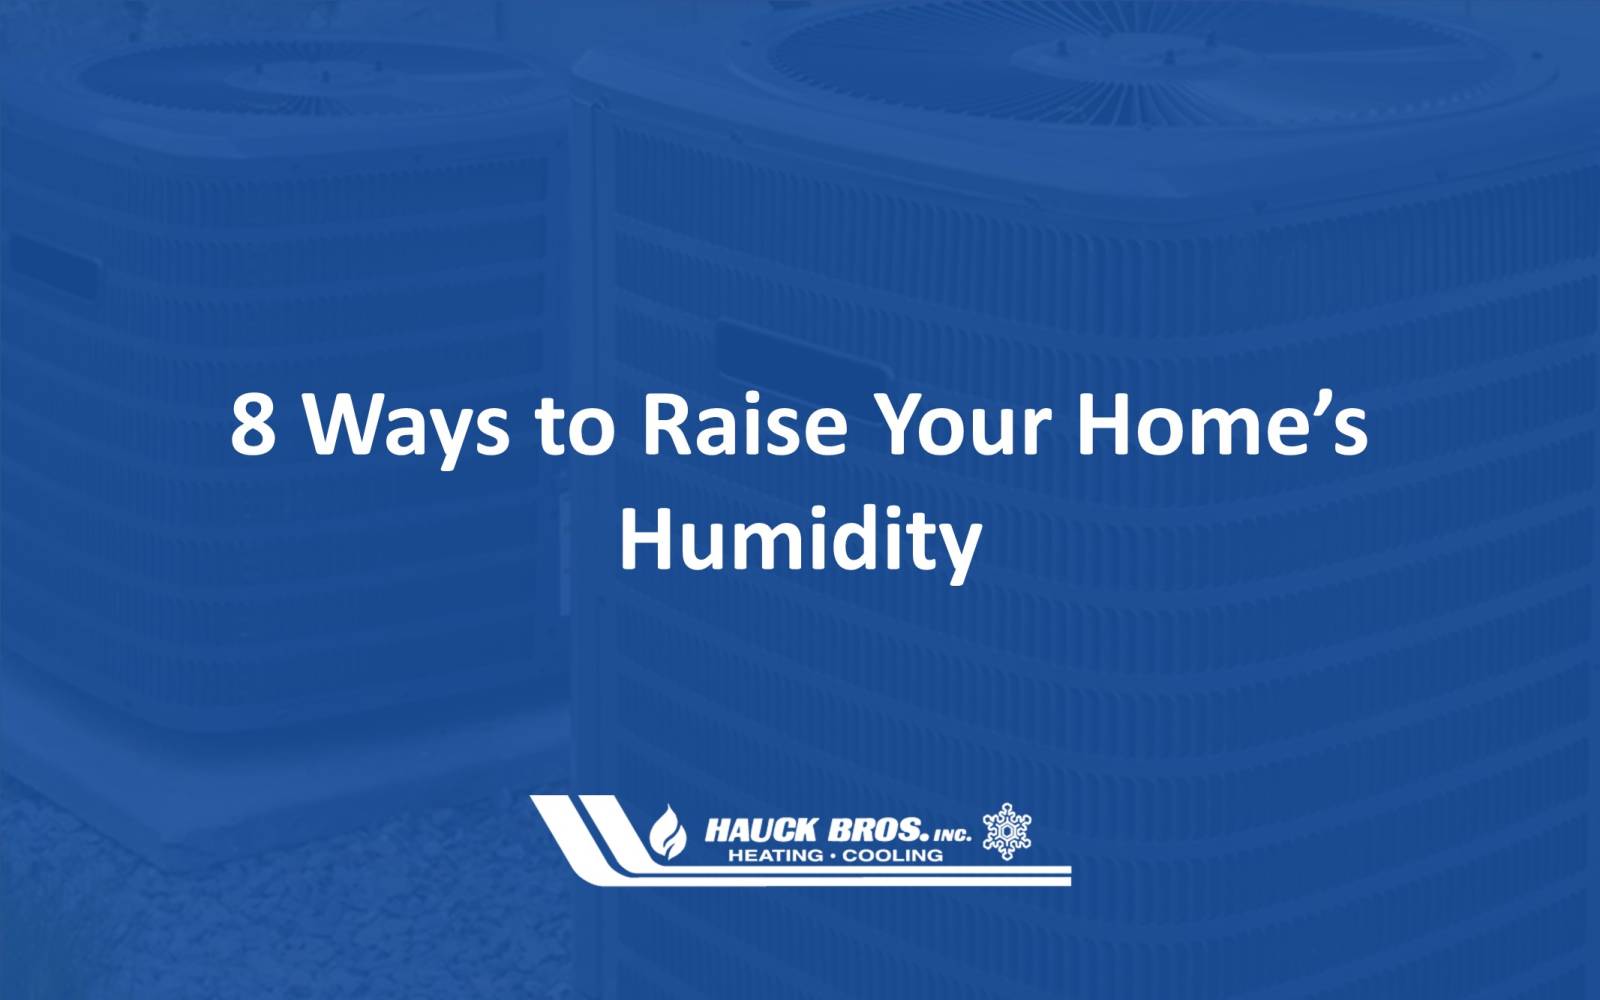 8 Ways to Raise Your Home's Humidity